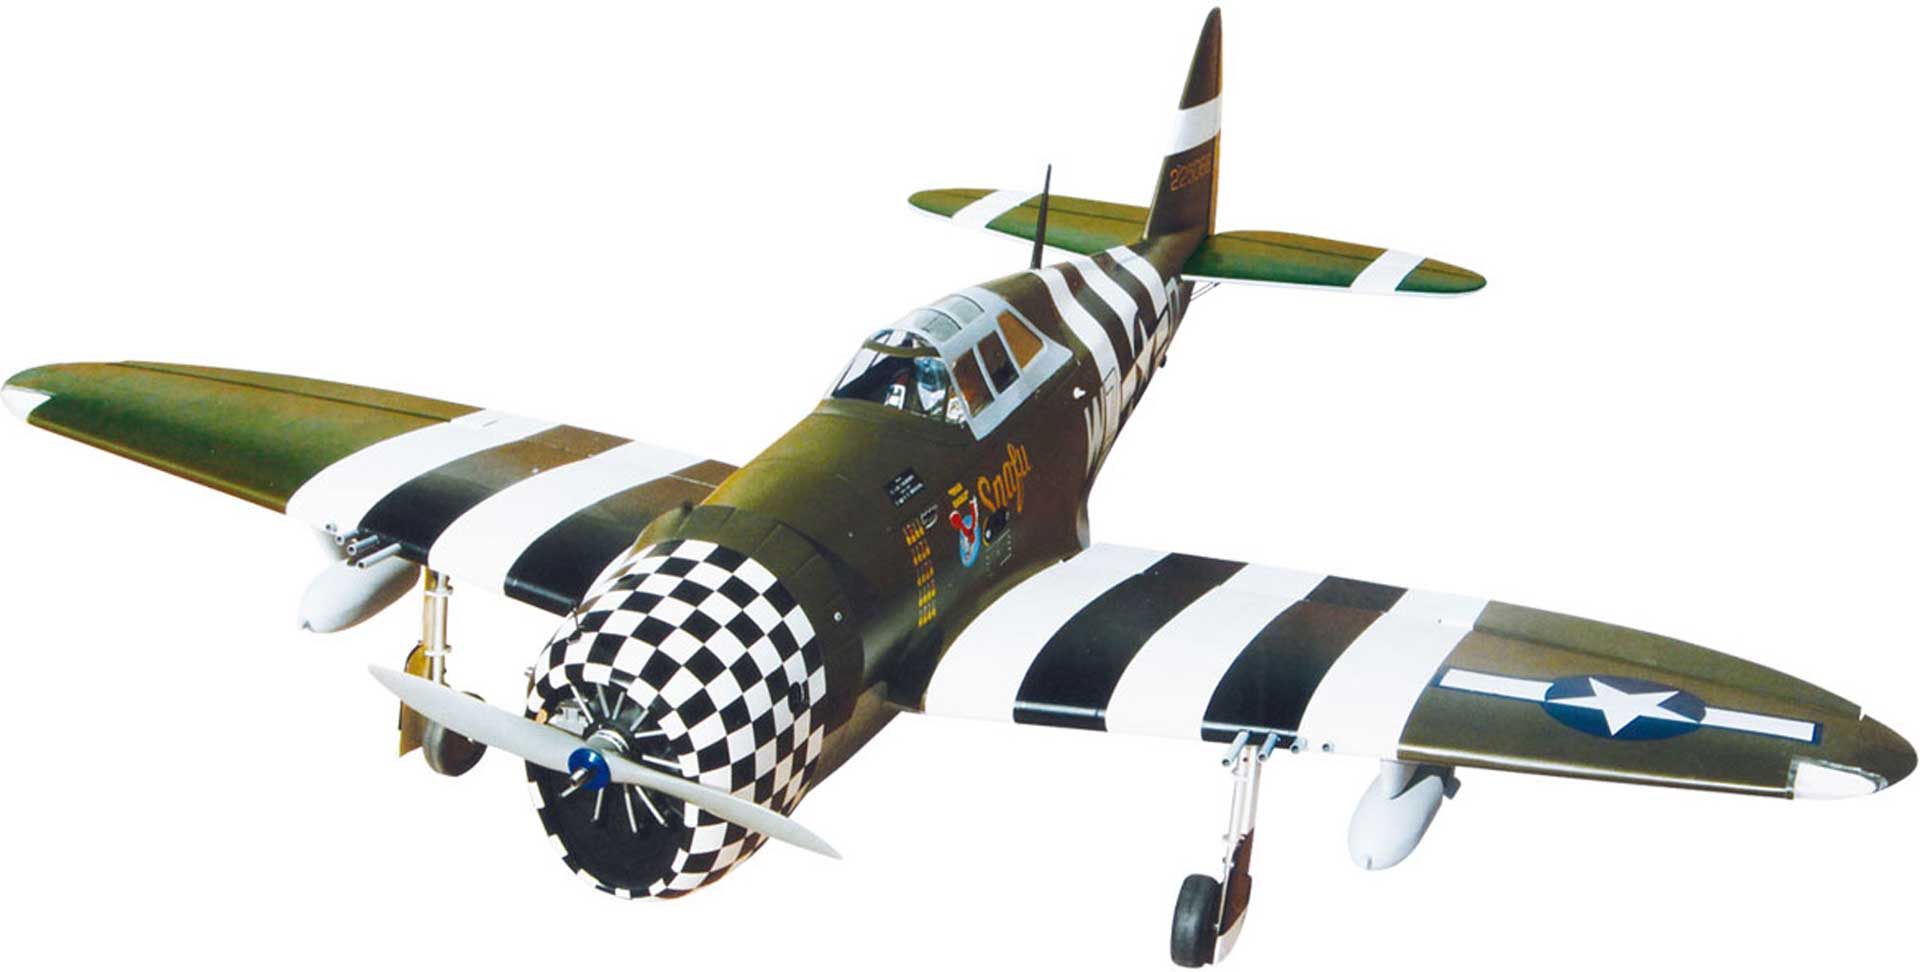 Seagull Models ( SG-Models ) P-47G THUNDERBOLT 60 "SNAFU" WITH RETRACTS AND LIGHTING